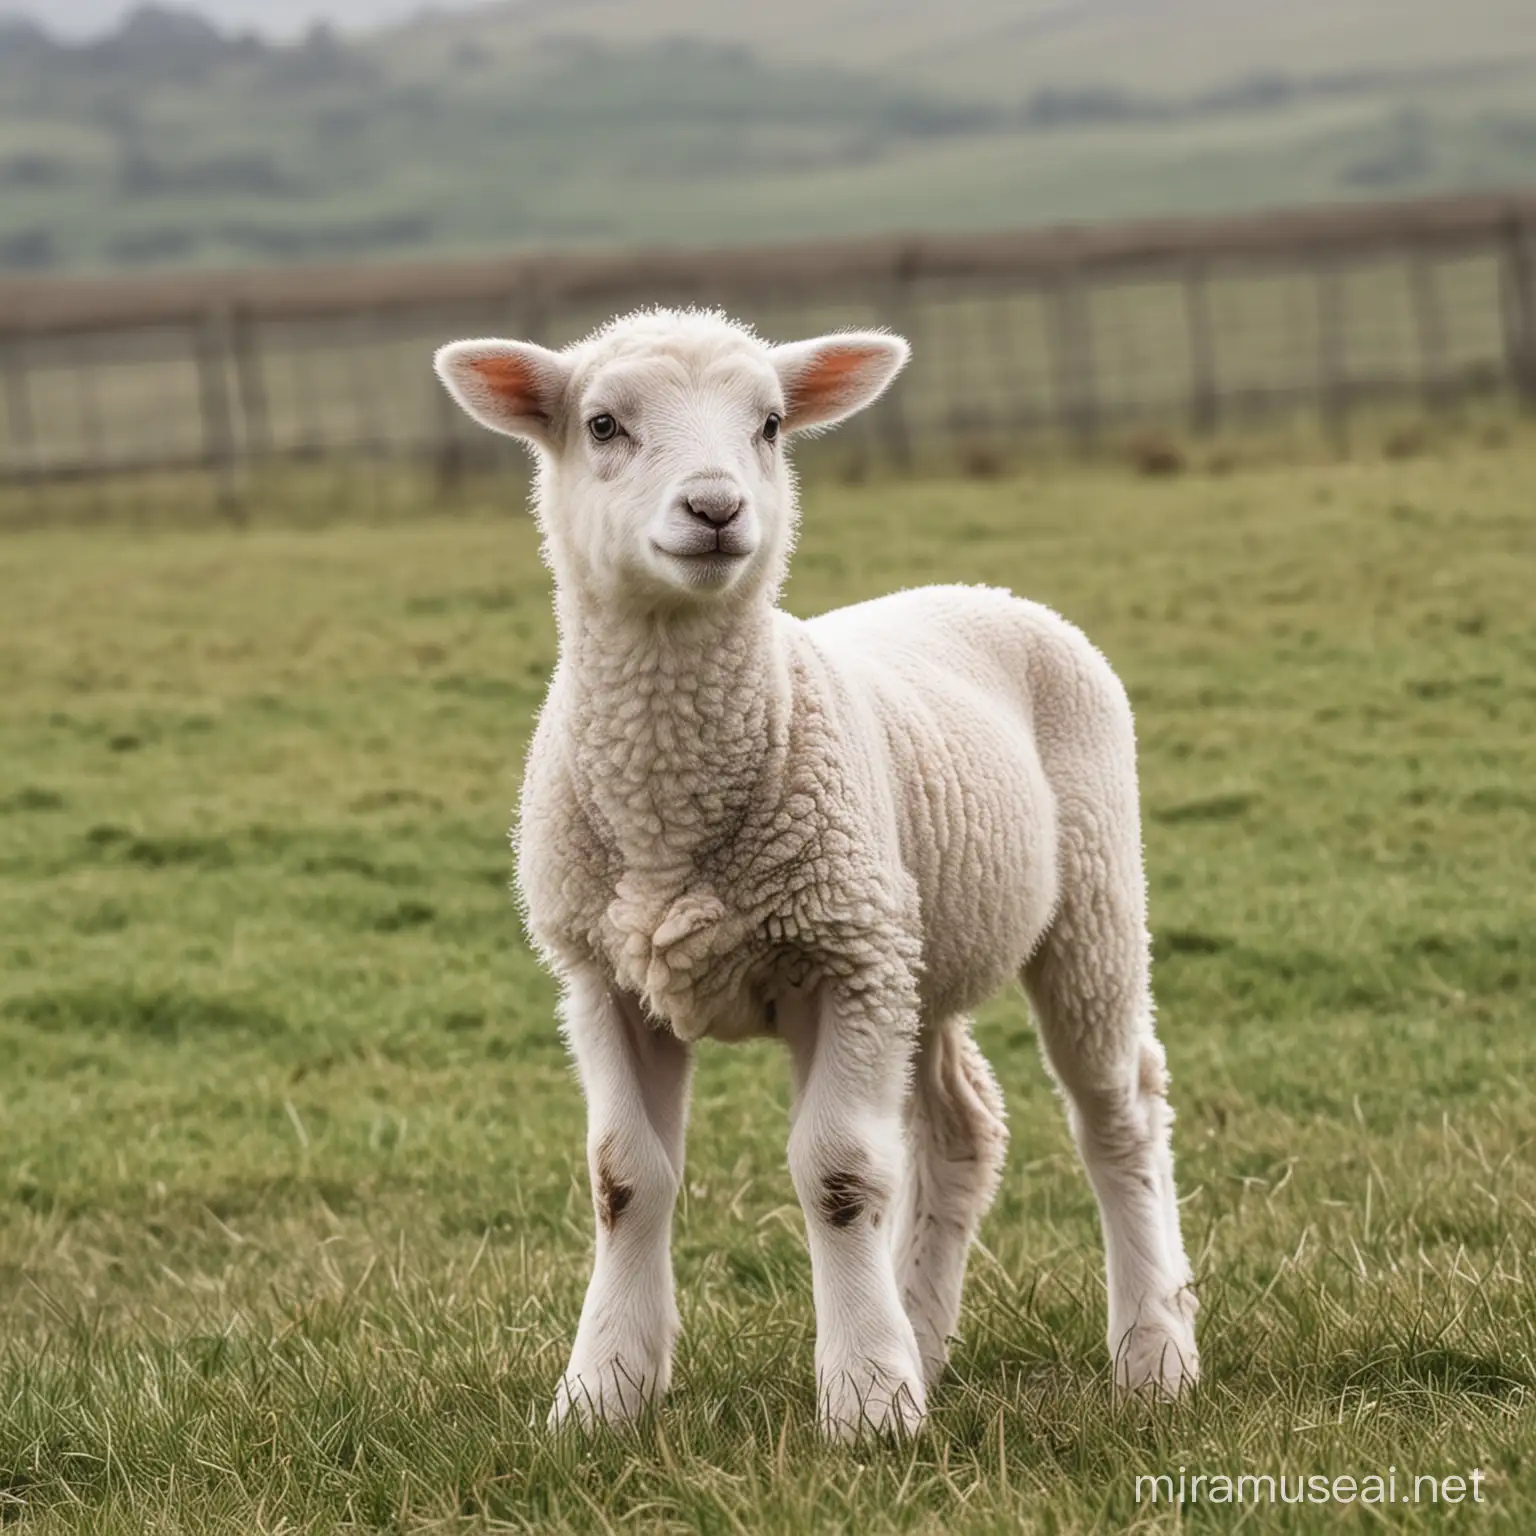 A LAMB STANDING OUTDOORS. IN A CANON 750D 50MM. ONE-THIRD WHITESPACE